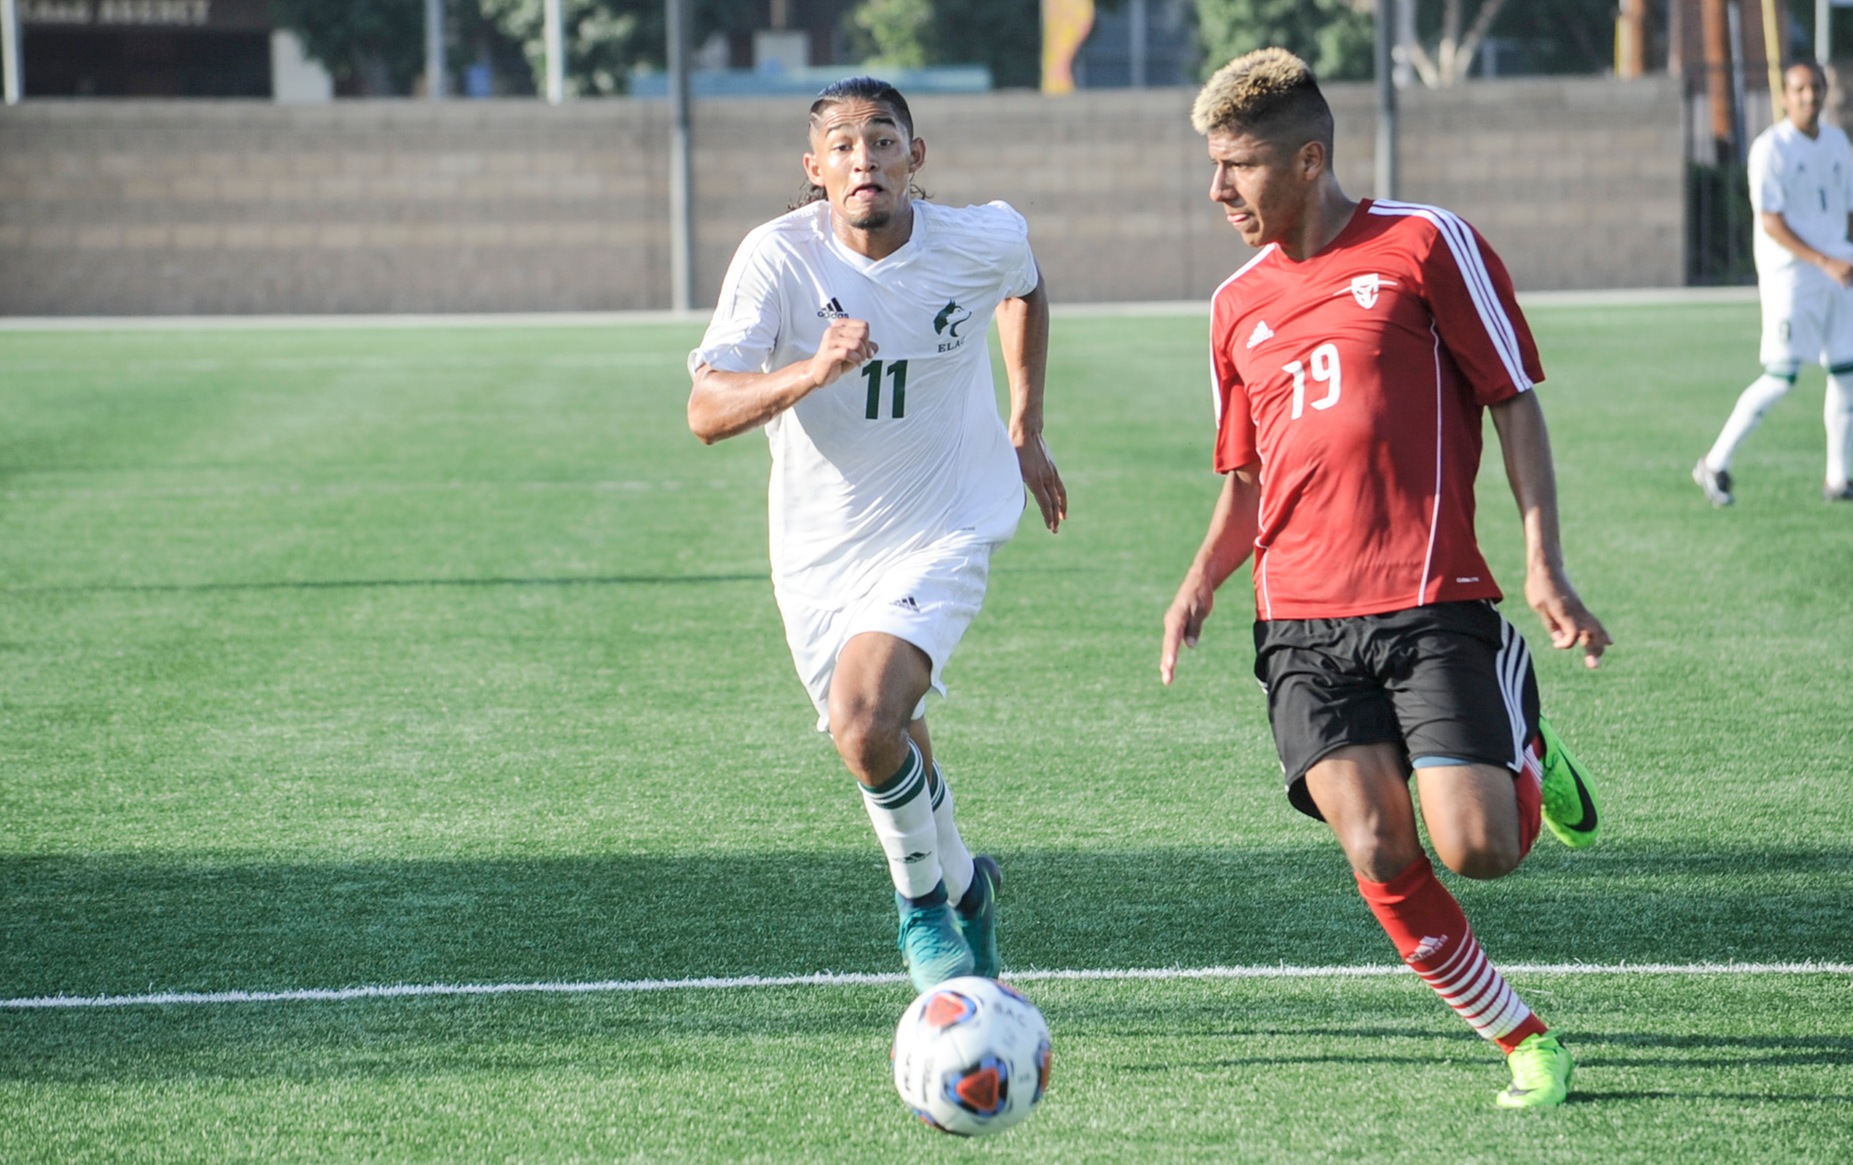 East Los Angeles College freshman Kevin Rodriguez moves towards the goal and scores in the 64th minute against Santa Ana College. The Huskies tied the Dons with the equalizer in the 90th minute in a 2-2 tie. (Photo by Tadzio Garcia)